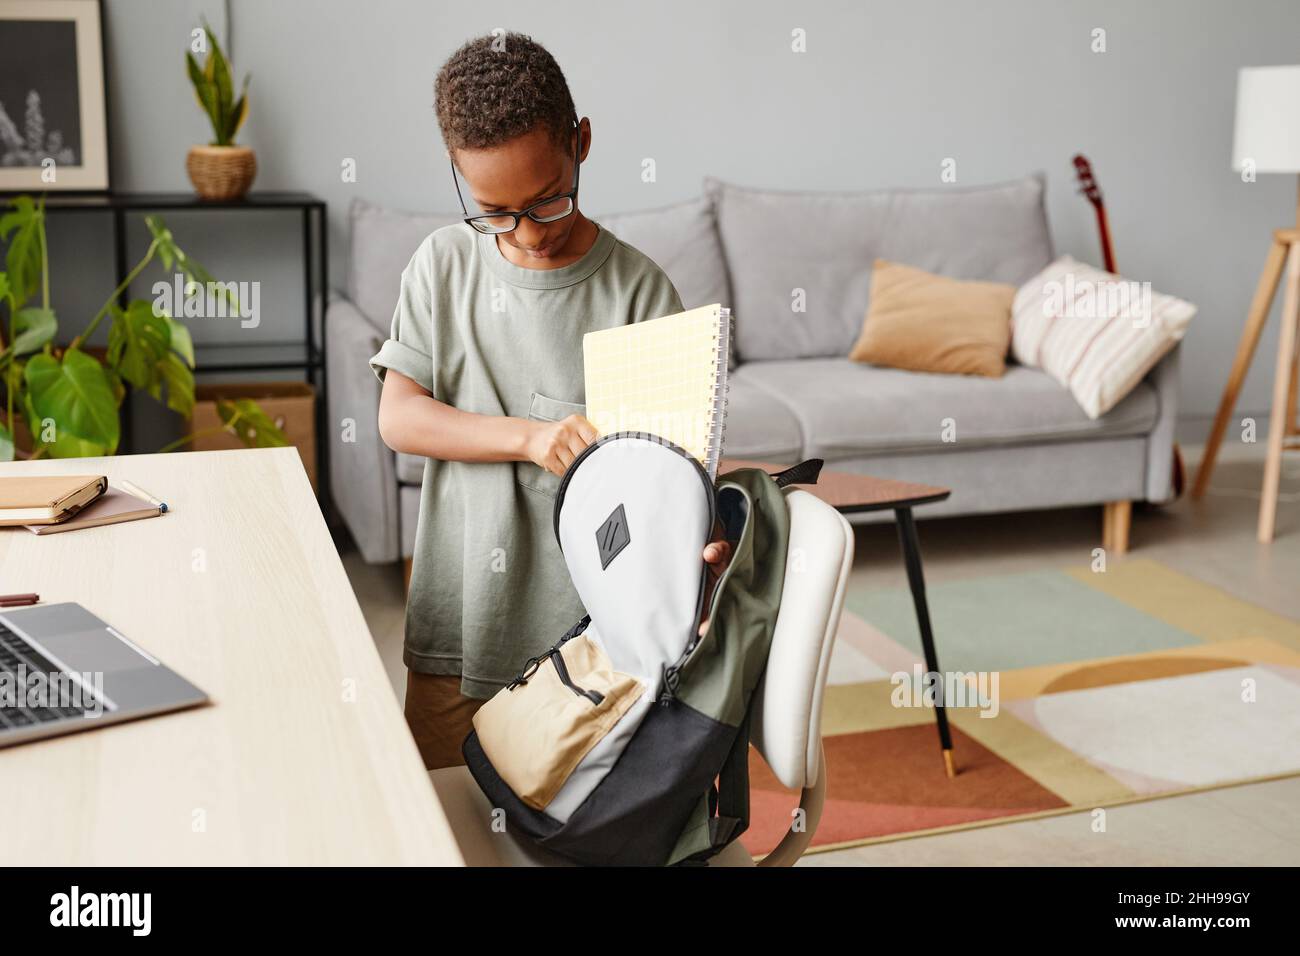 Portrait of young African-American boy packing backpack at home, copy space Stock Photo